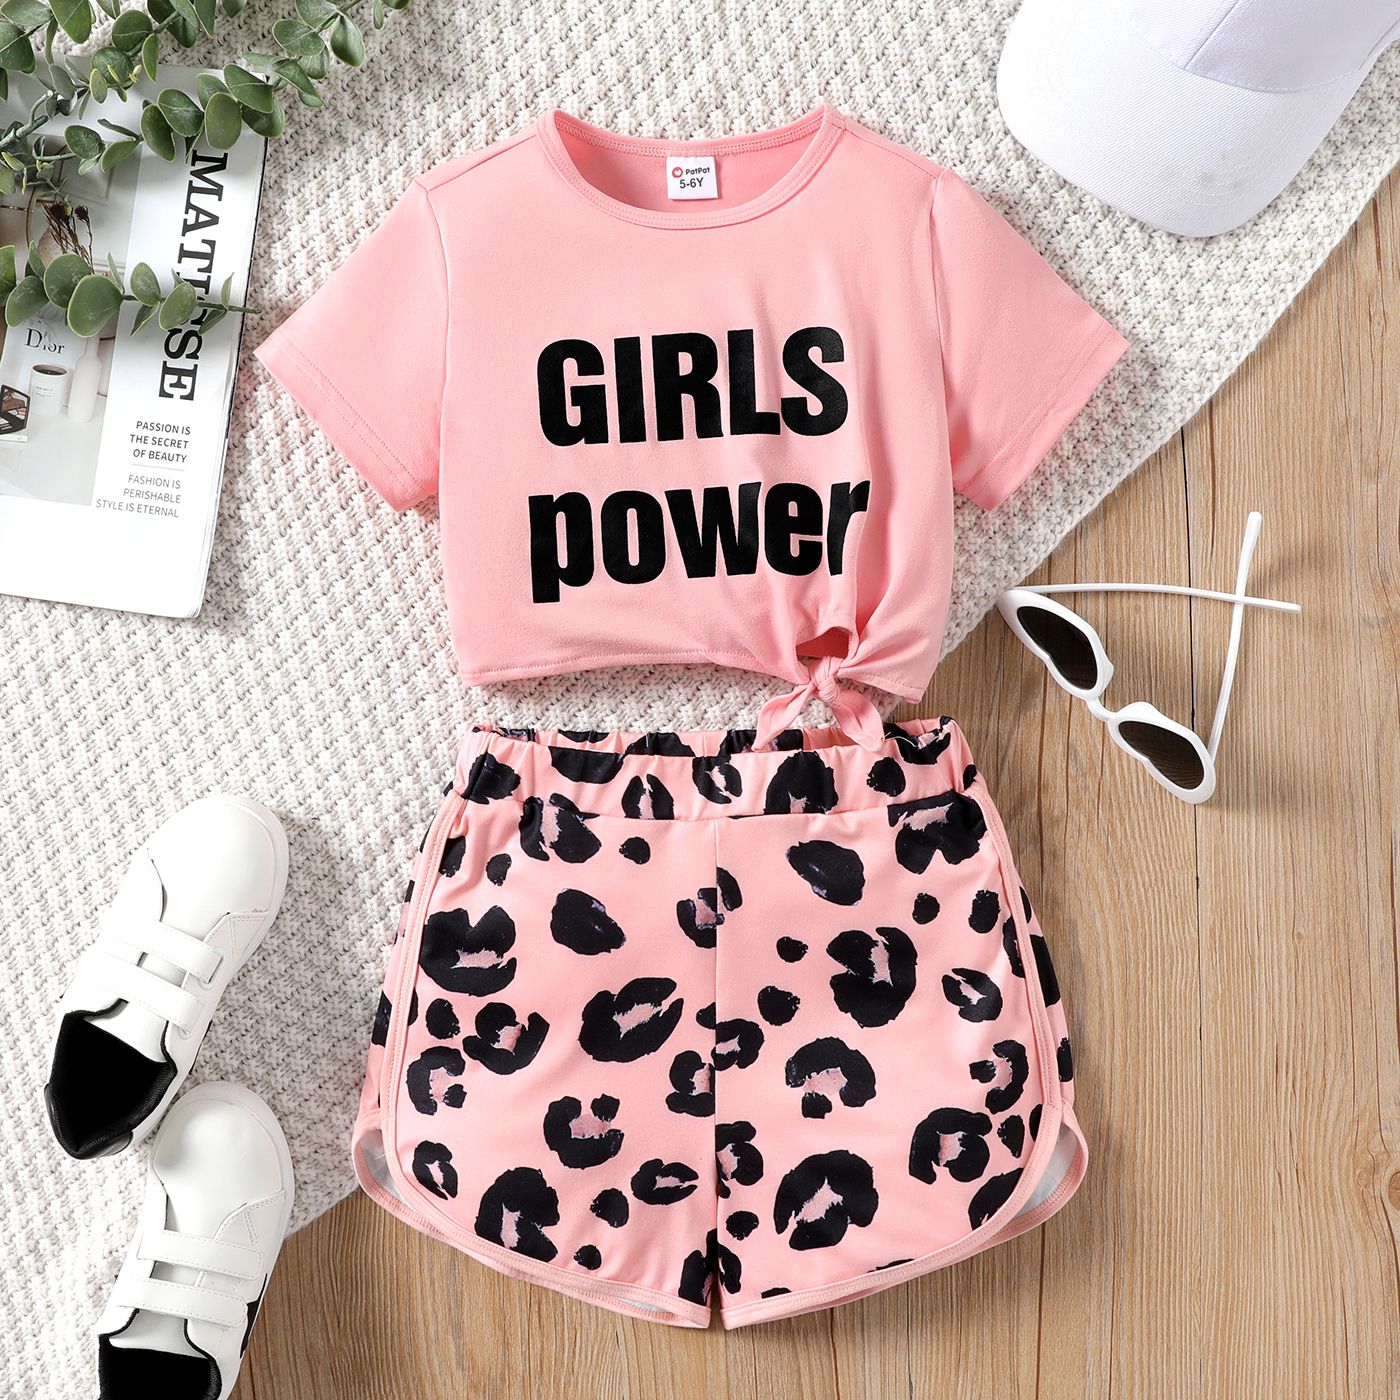 2pcs Kid Girl Letter Print Tie Knot Short-sleeve Tee and Leopard Print Shorts Set